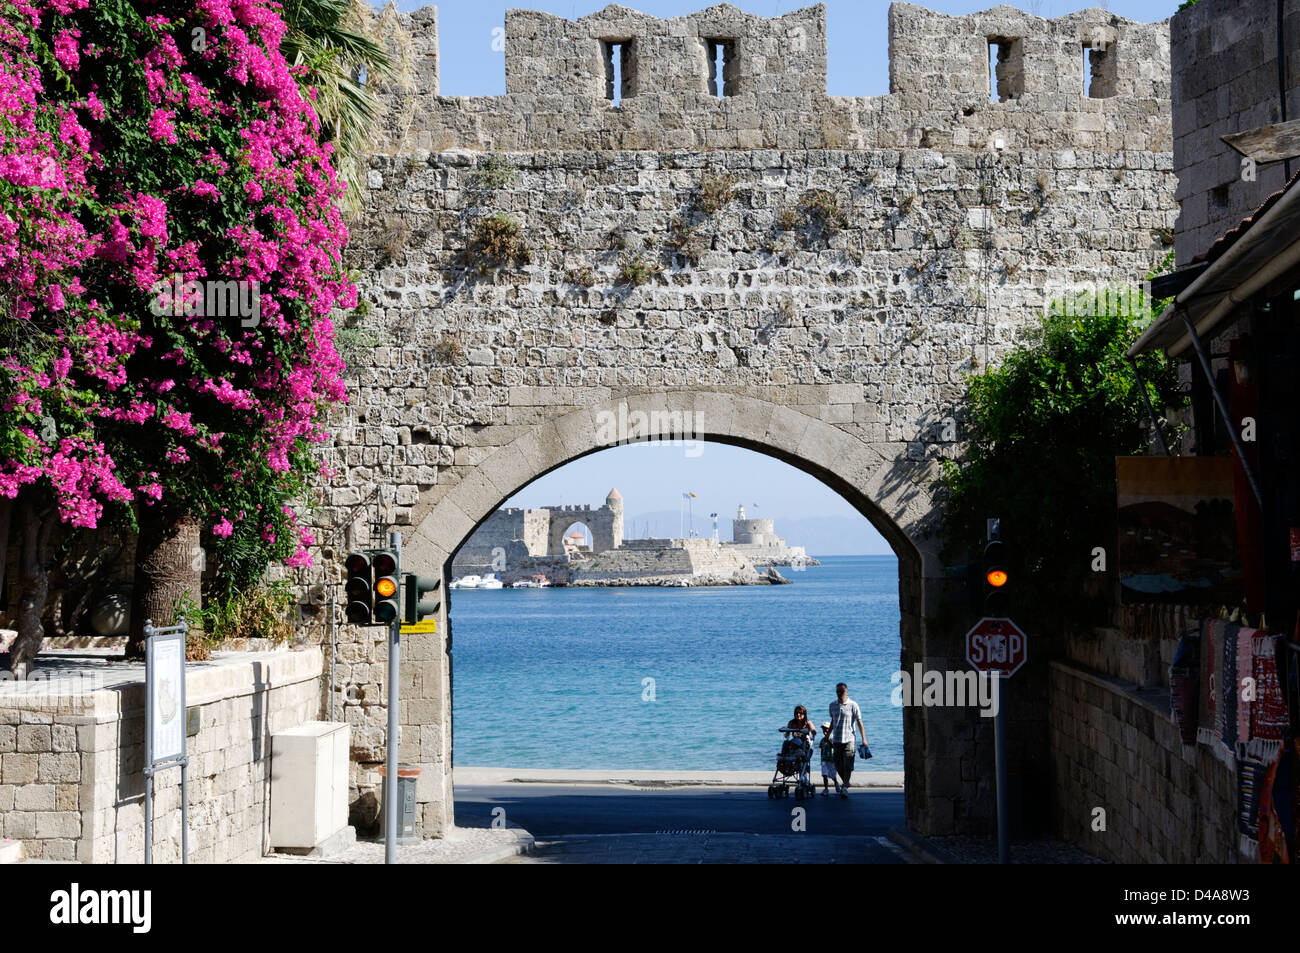 Rhodes. Greece. St Catherine’s Gate at the old town of Rhodes with ruins of St Paul’s gate and port of Rhodes in background Stock Photo